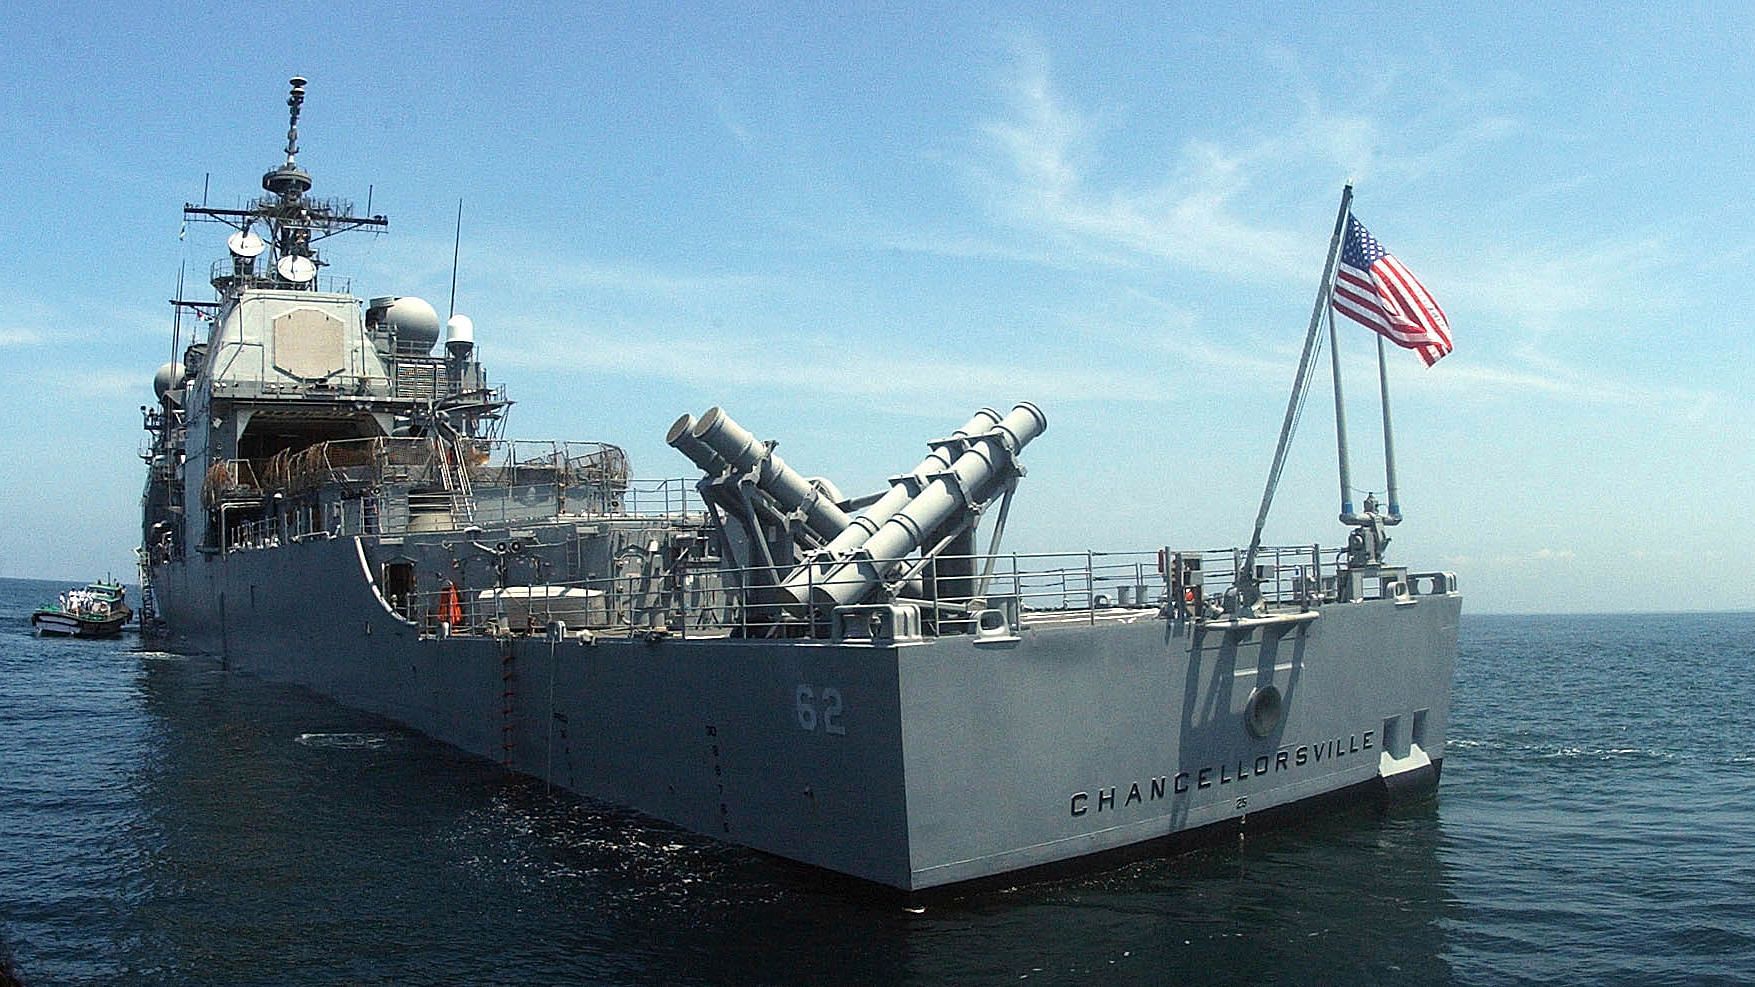 In this September 2002 file photo, the US guided missile cruiser USS Chancellorsville lies at anchor in India’s southern port of Cochin. The US and Russian militaries accused each other of unsafe actions on 7 June  2019,